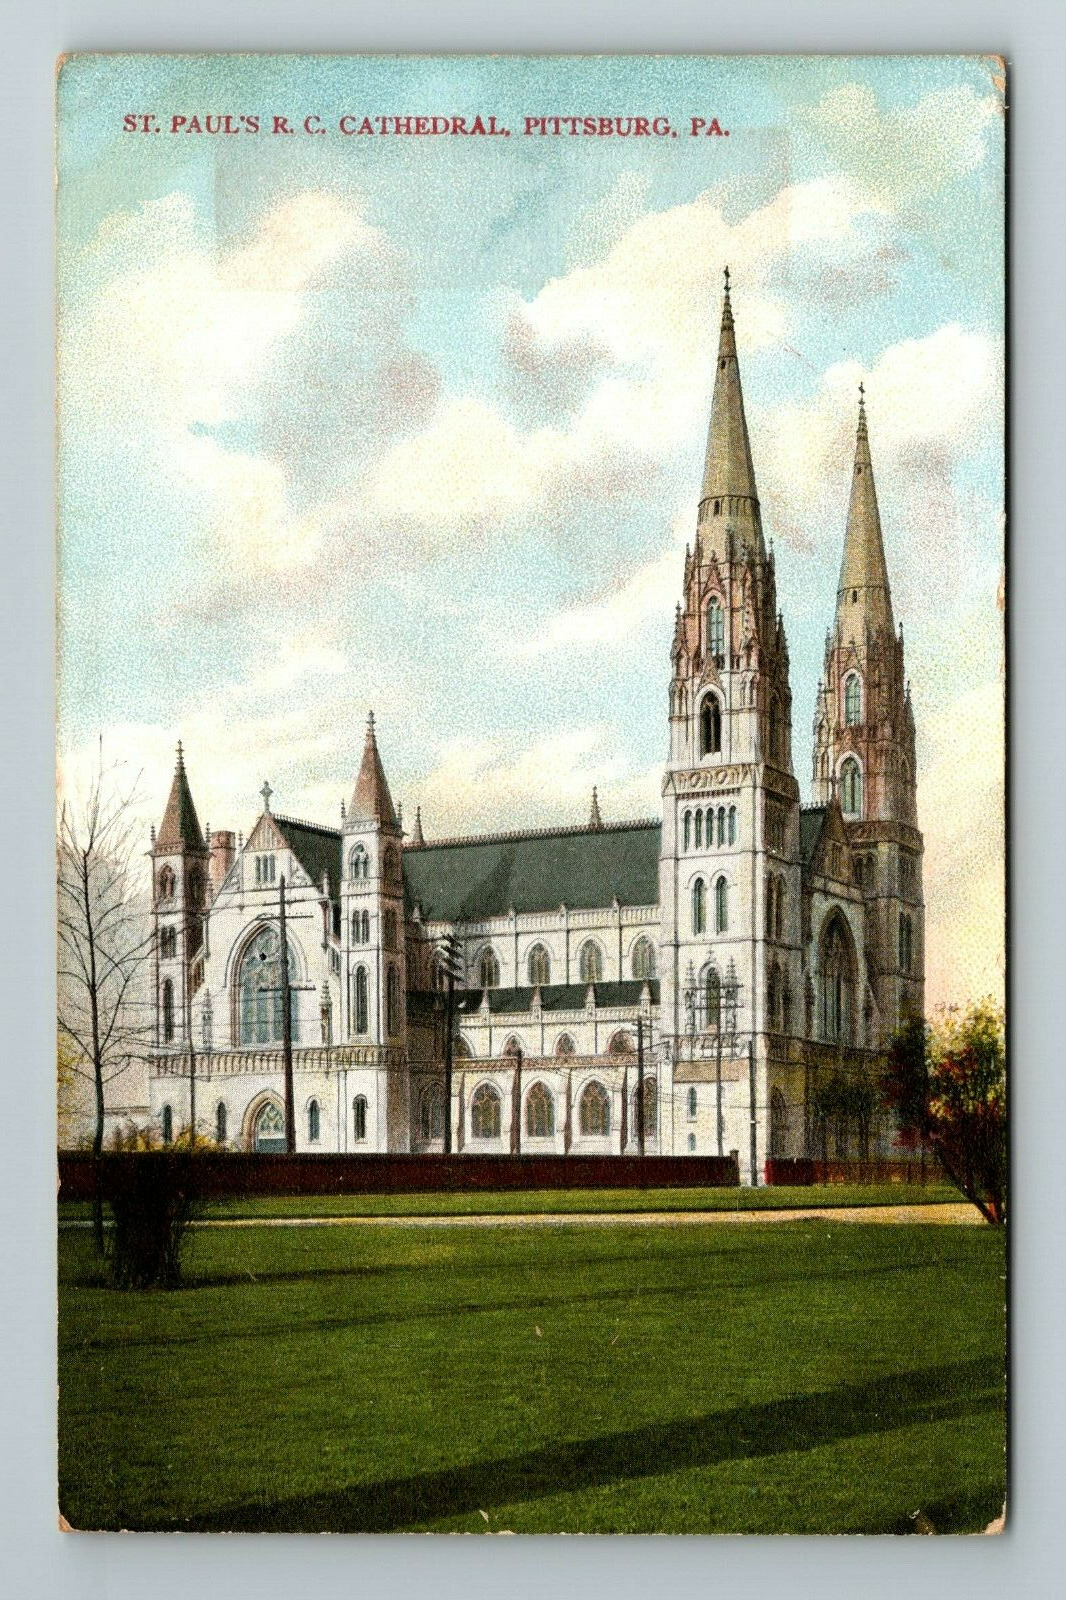 Pittsburg PA-Pennsylvania, St Paul's R.C. Cathedral, Religion, Vintage Postcard